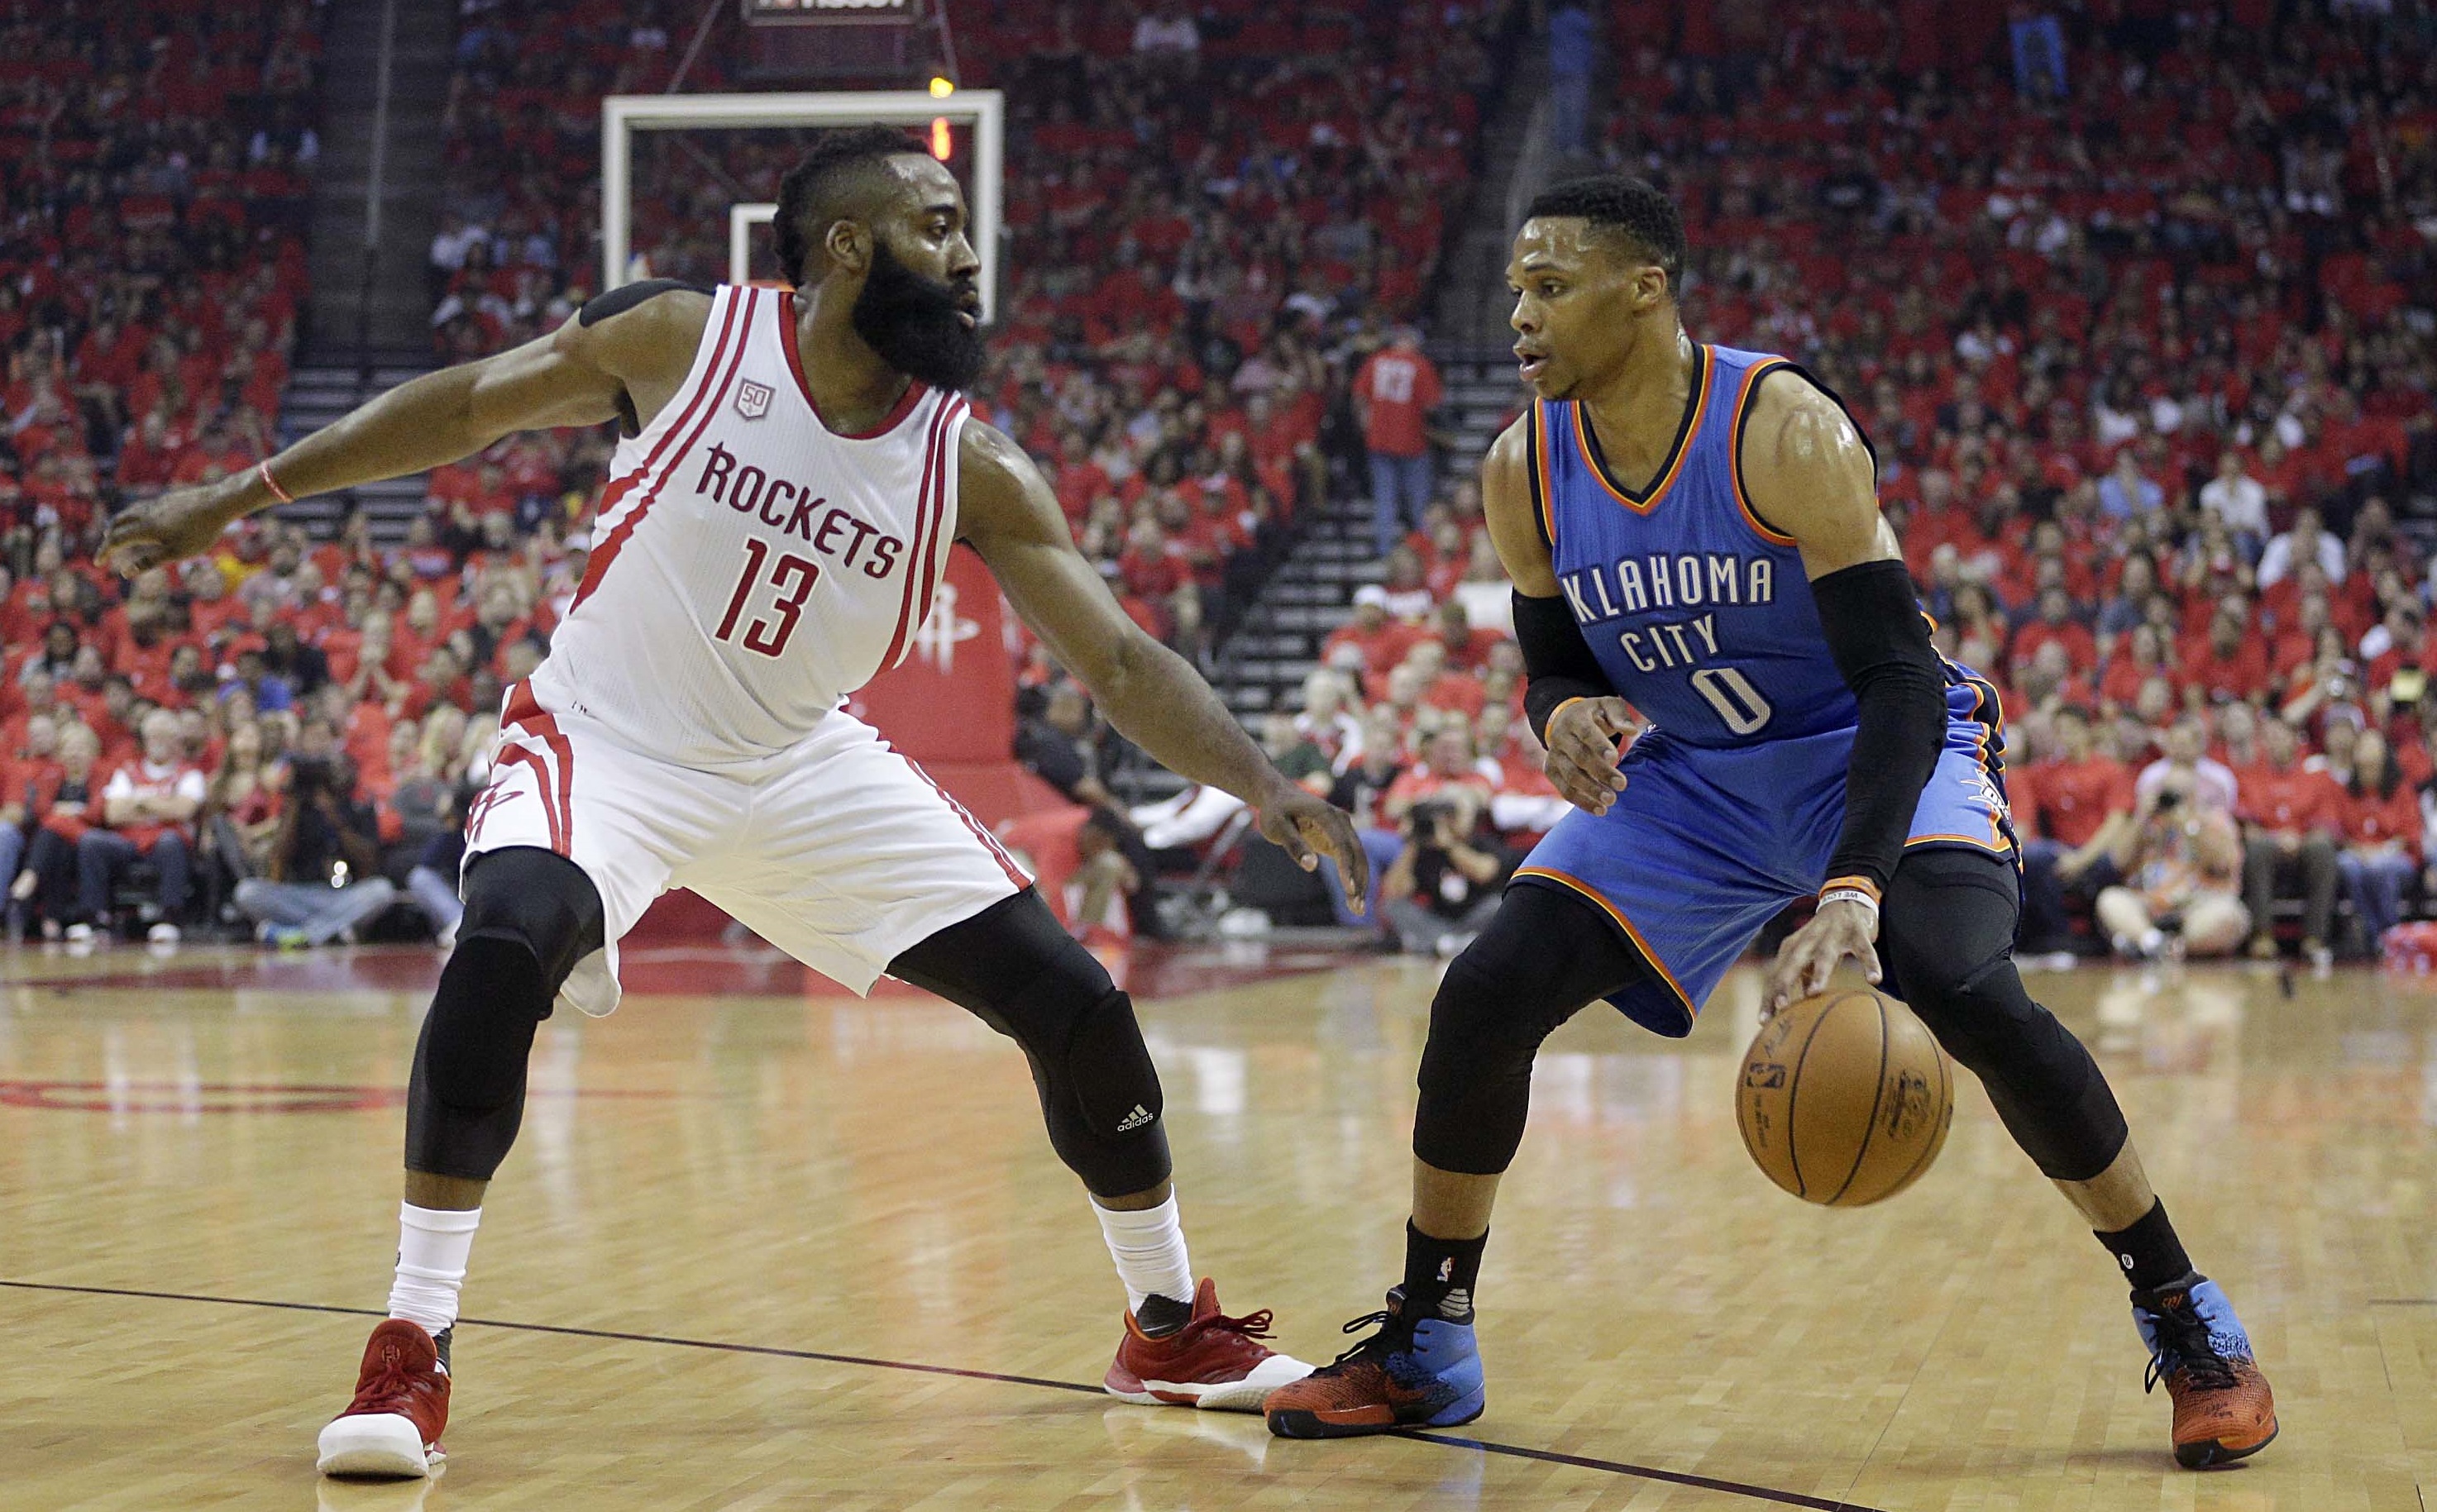 Apr 25, 2017; Houston, TX, USA; Oklahoma City Thunder guard Russell Westbrook (0) dribbles against Houston Rockets guard James Harden (13) in the first quarter in game five of the first round of the 2017 NBA Playoffs at Toyota Center. Mandatory Credit: Thomas B. Shea-USA TODAY Sports